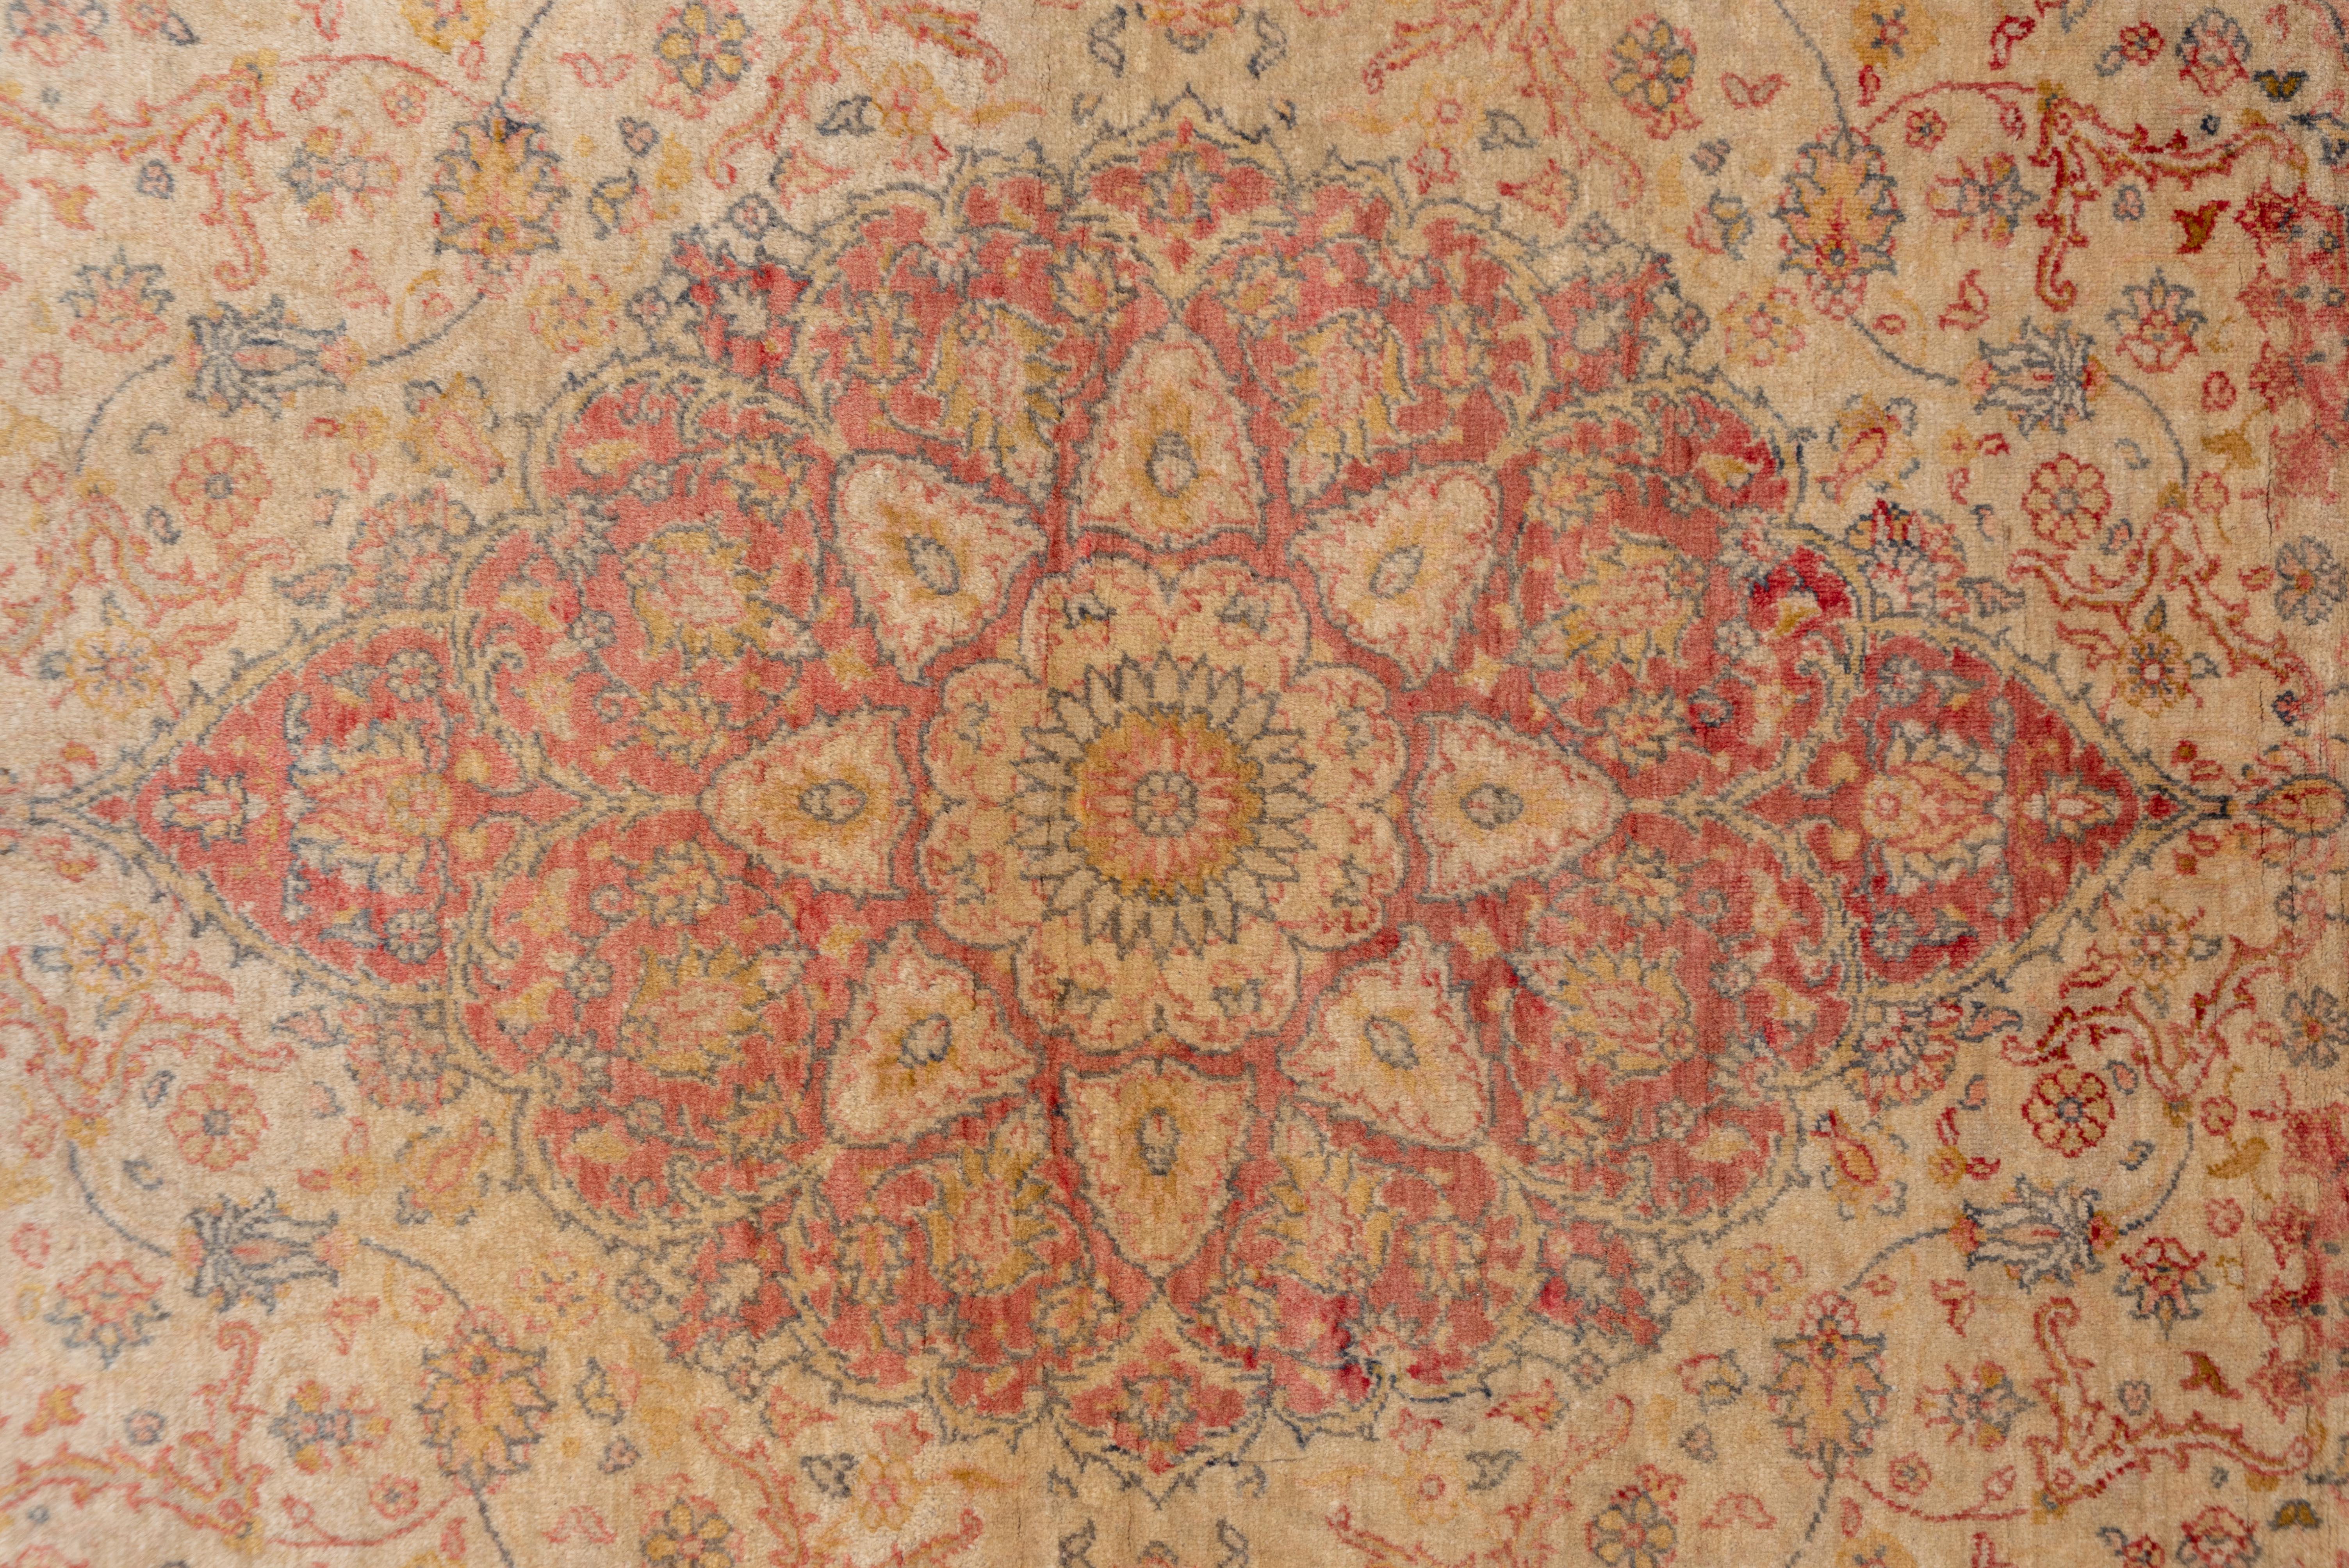 Early 20th Century Turkish Sivas in Orange Tans and Shades of Light Brown For Sale